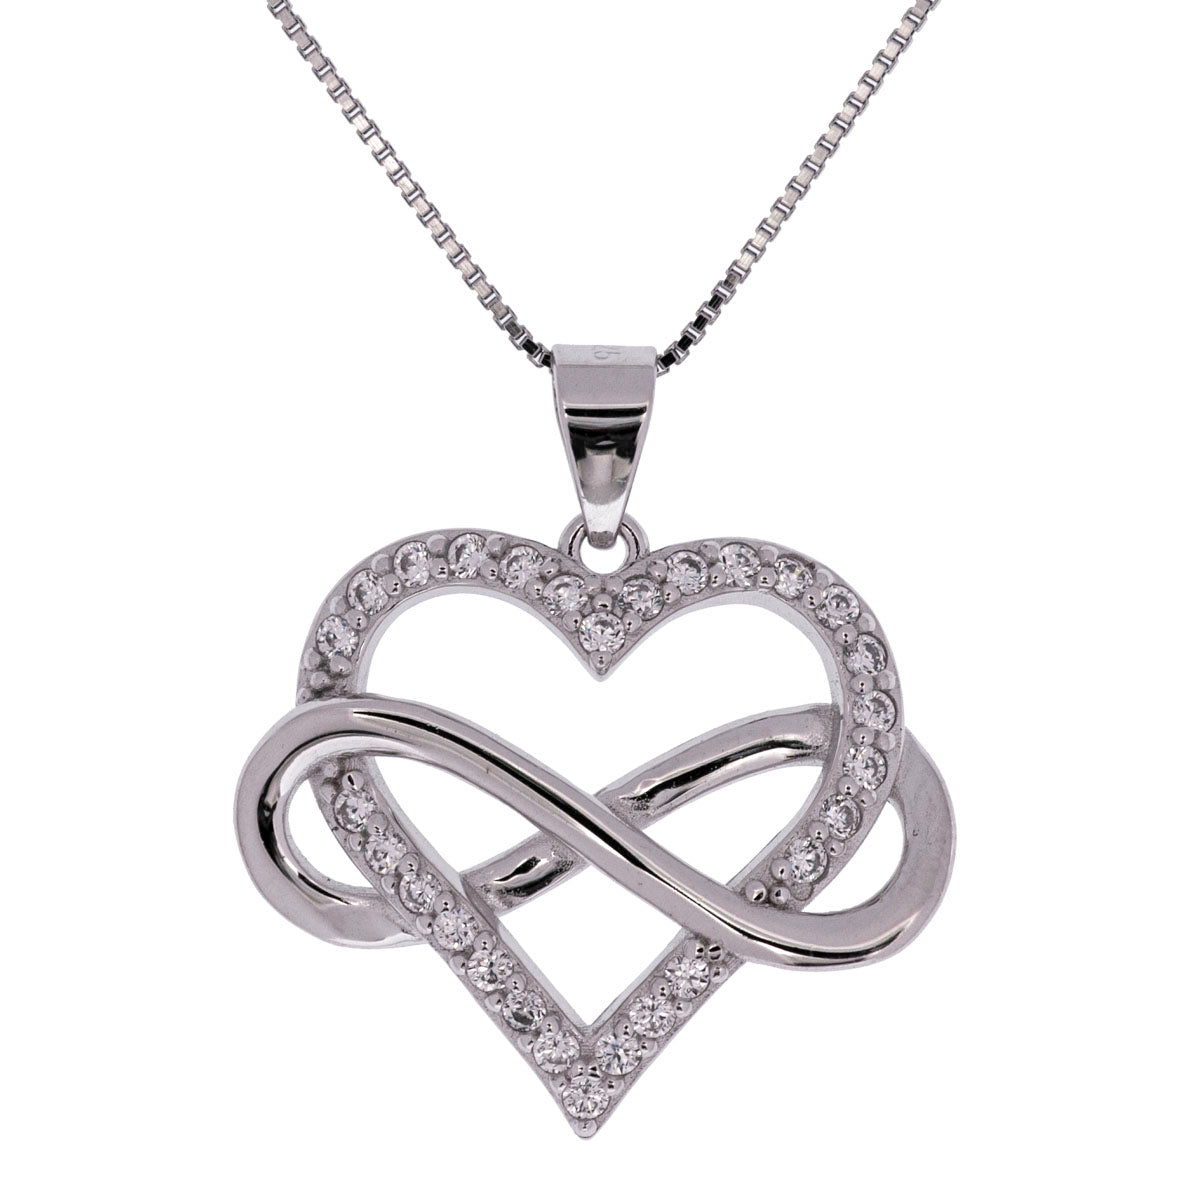 The Day I Met You Infinity Heart Silver Necklace - Soulmate